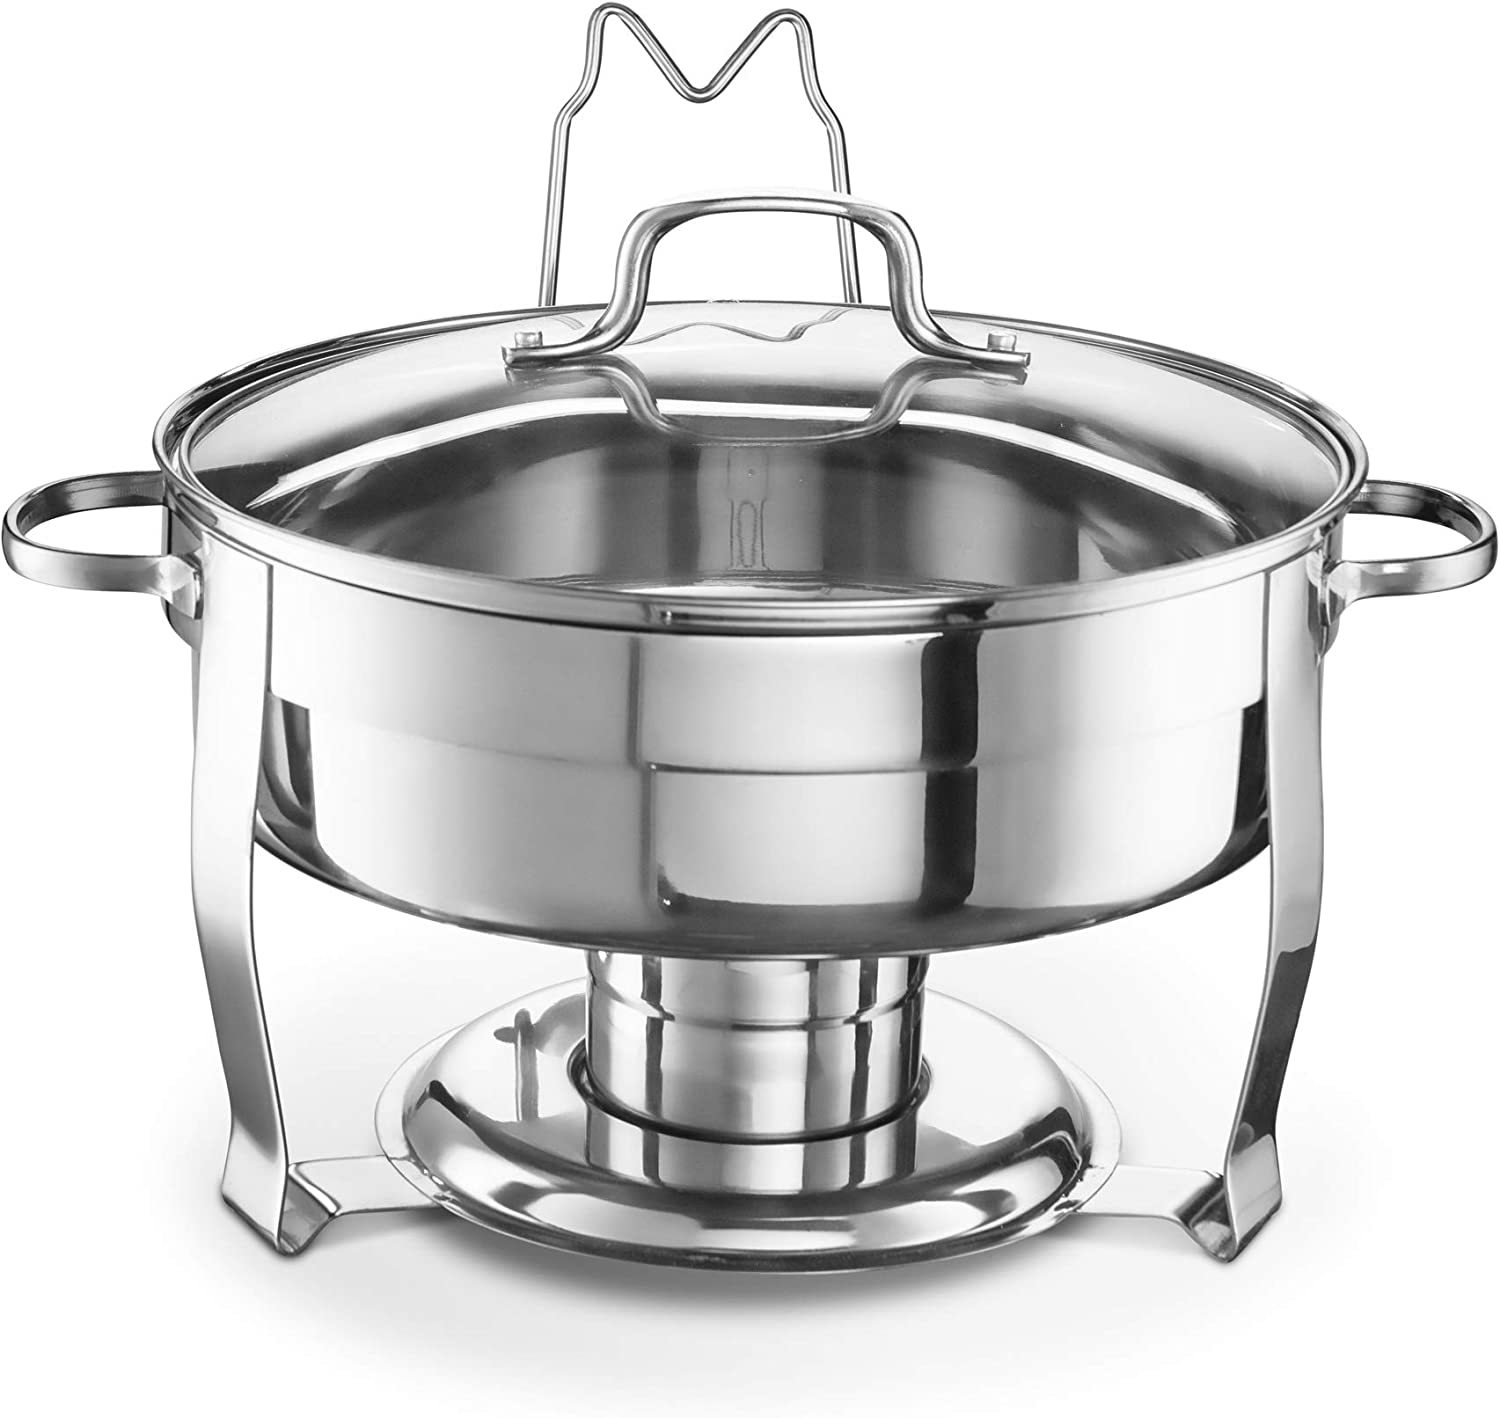 Kook Stainless Steel Chafing Dish Buffet Set with Glass Viewing Lid - 4-1/2-qt - Mellow Monkey